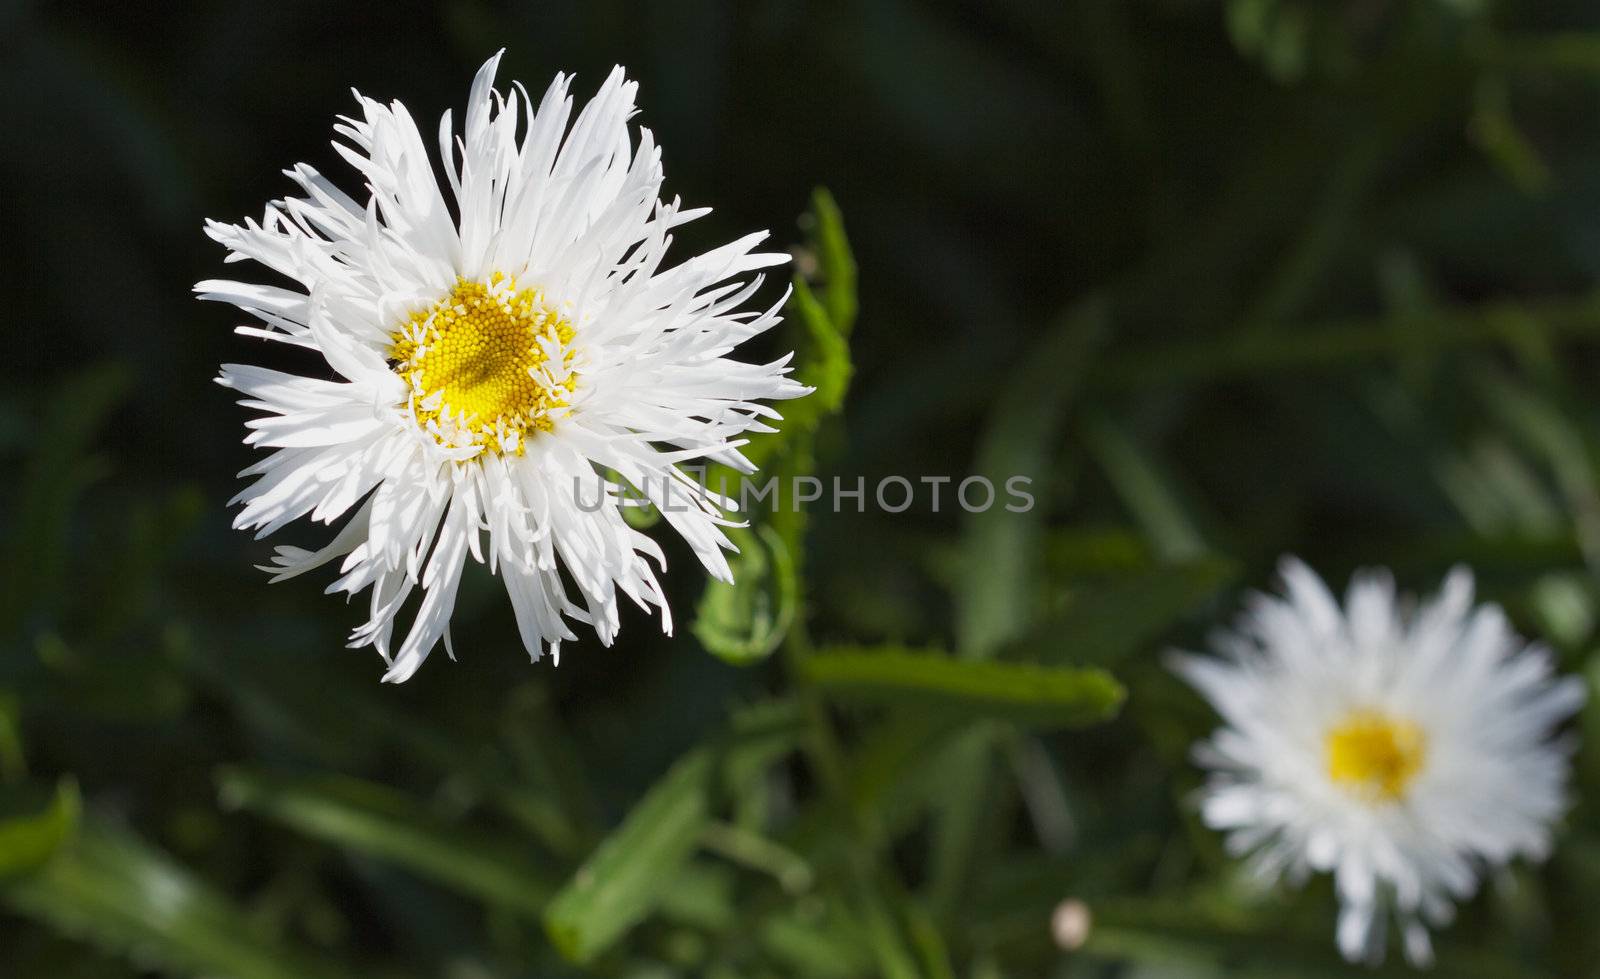 Two Crazy Daisies by bobkeenan